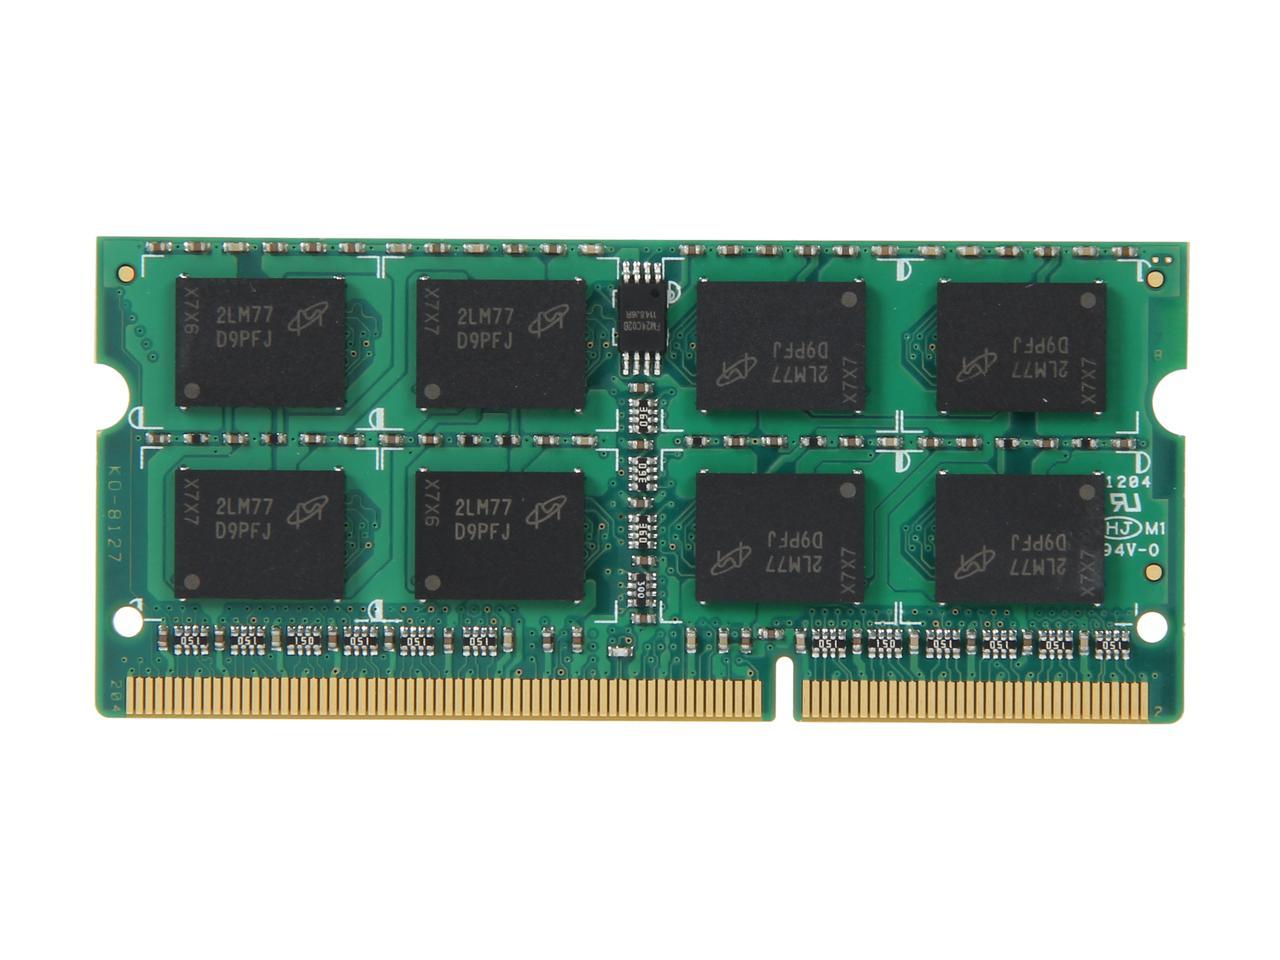 "Crucial 4GB DDR3L-1333 SODIMM Memory for Mac - CT4G3S1339M" - image 2 of 3